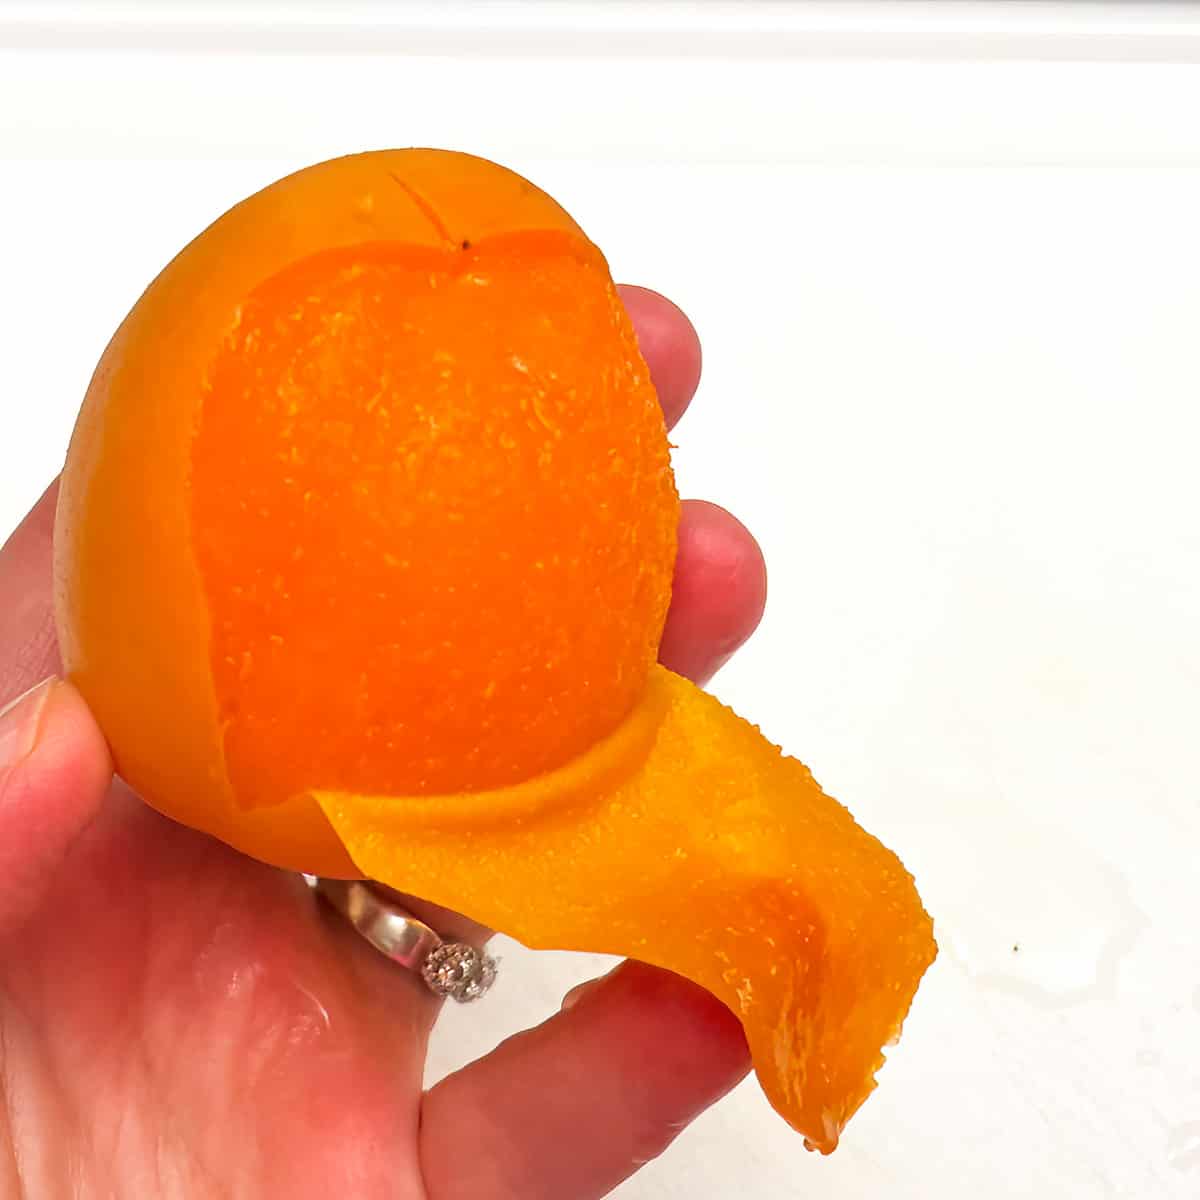 Peeling an apricot after the ice bath by scored cross on top.